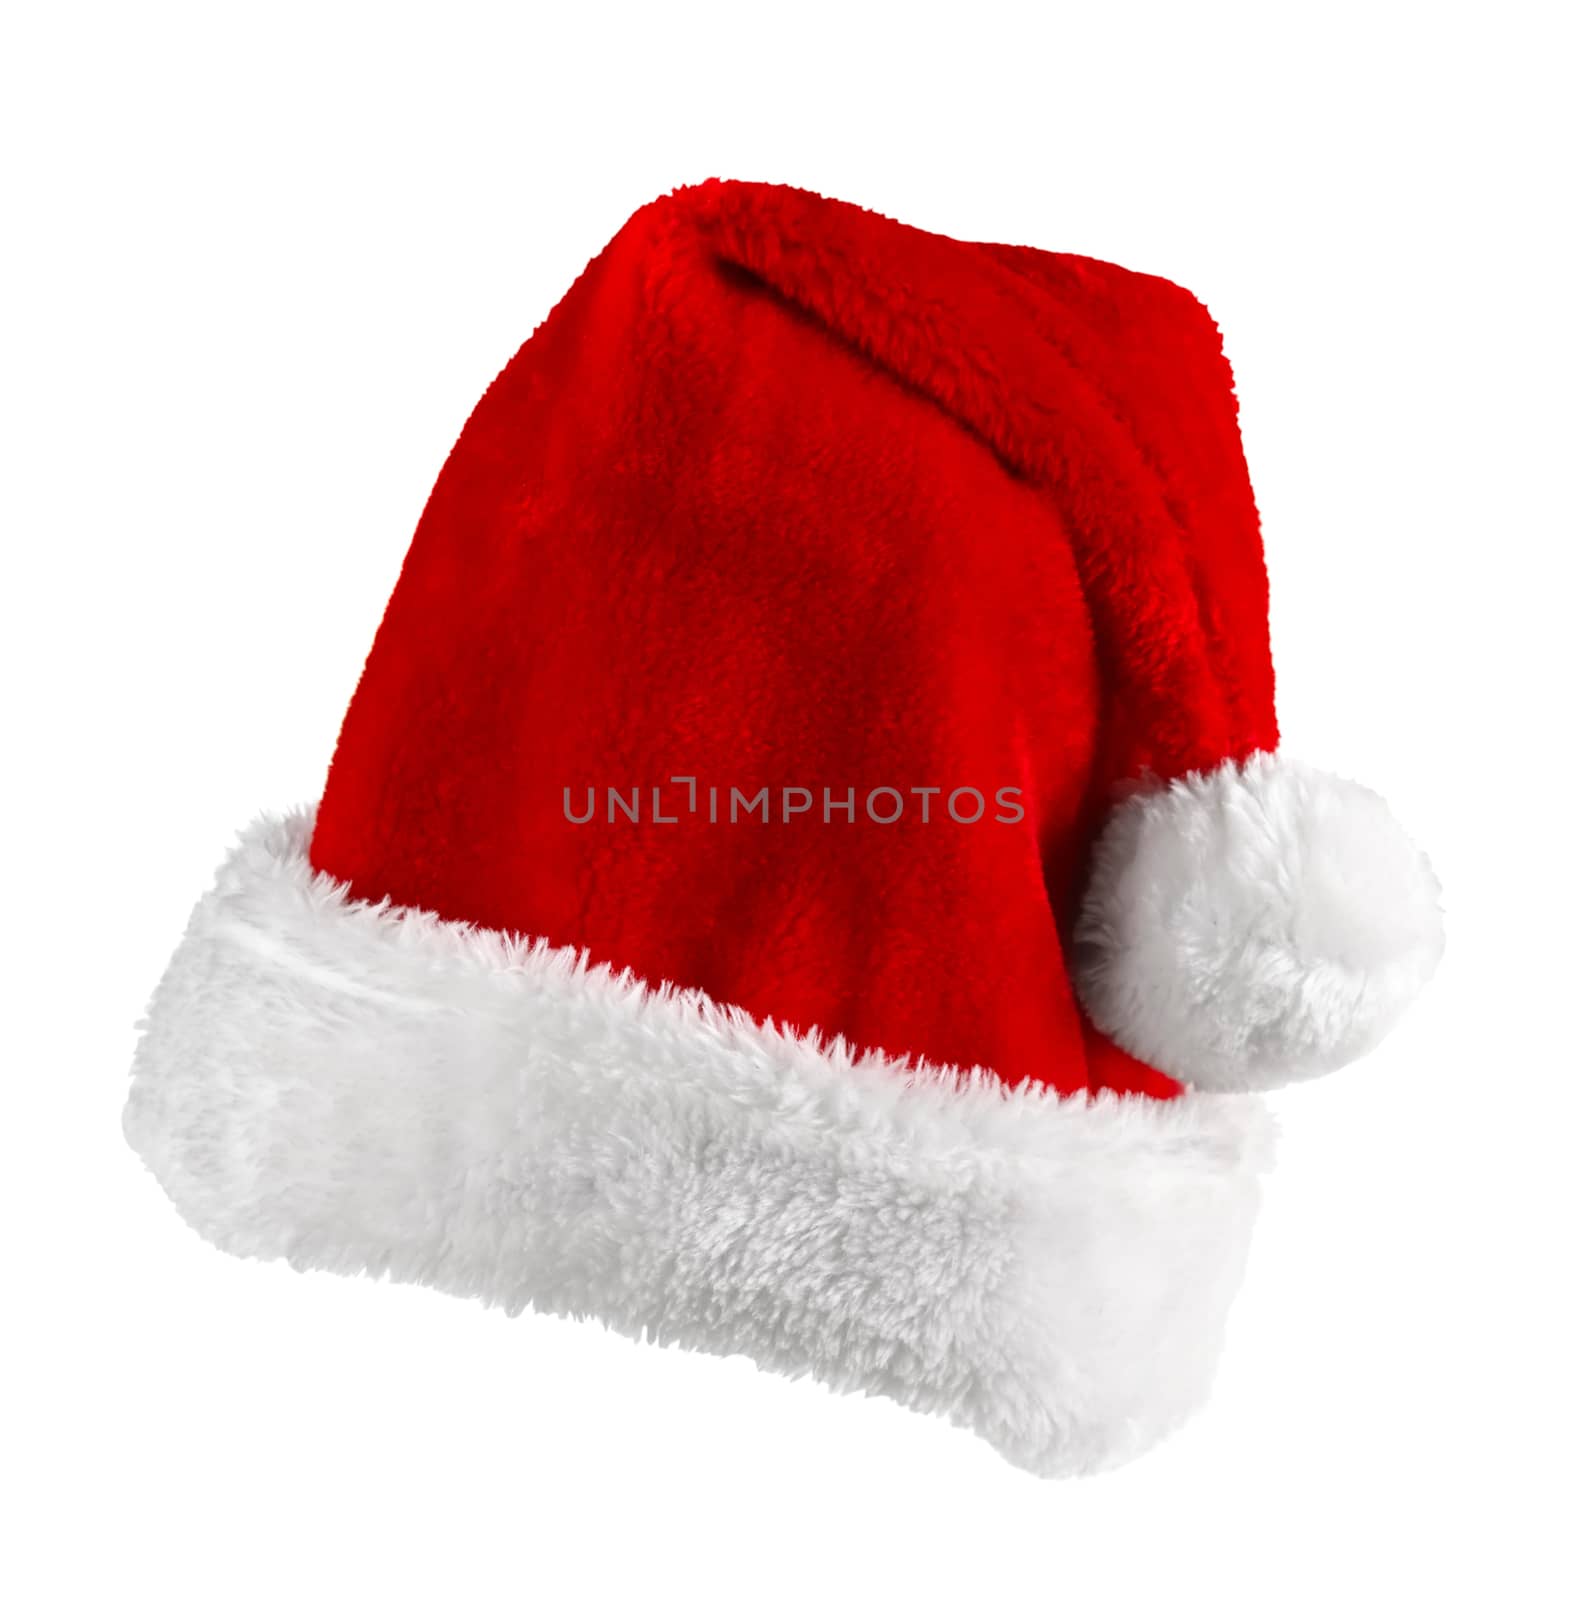 Single Santa Claus red hat isolated on white background by Bedolaga